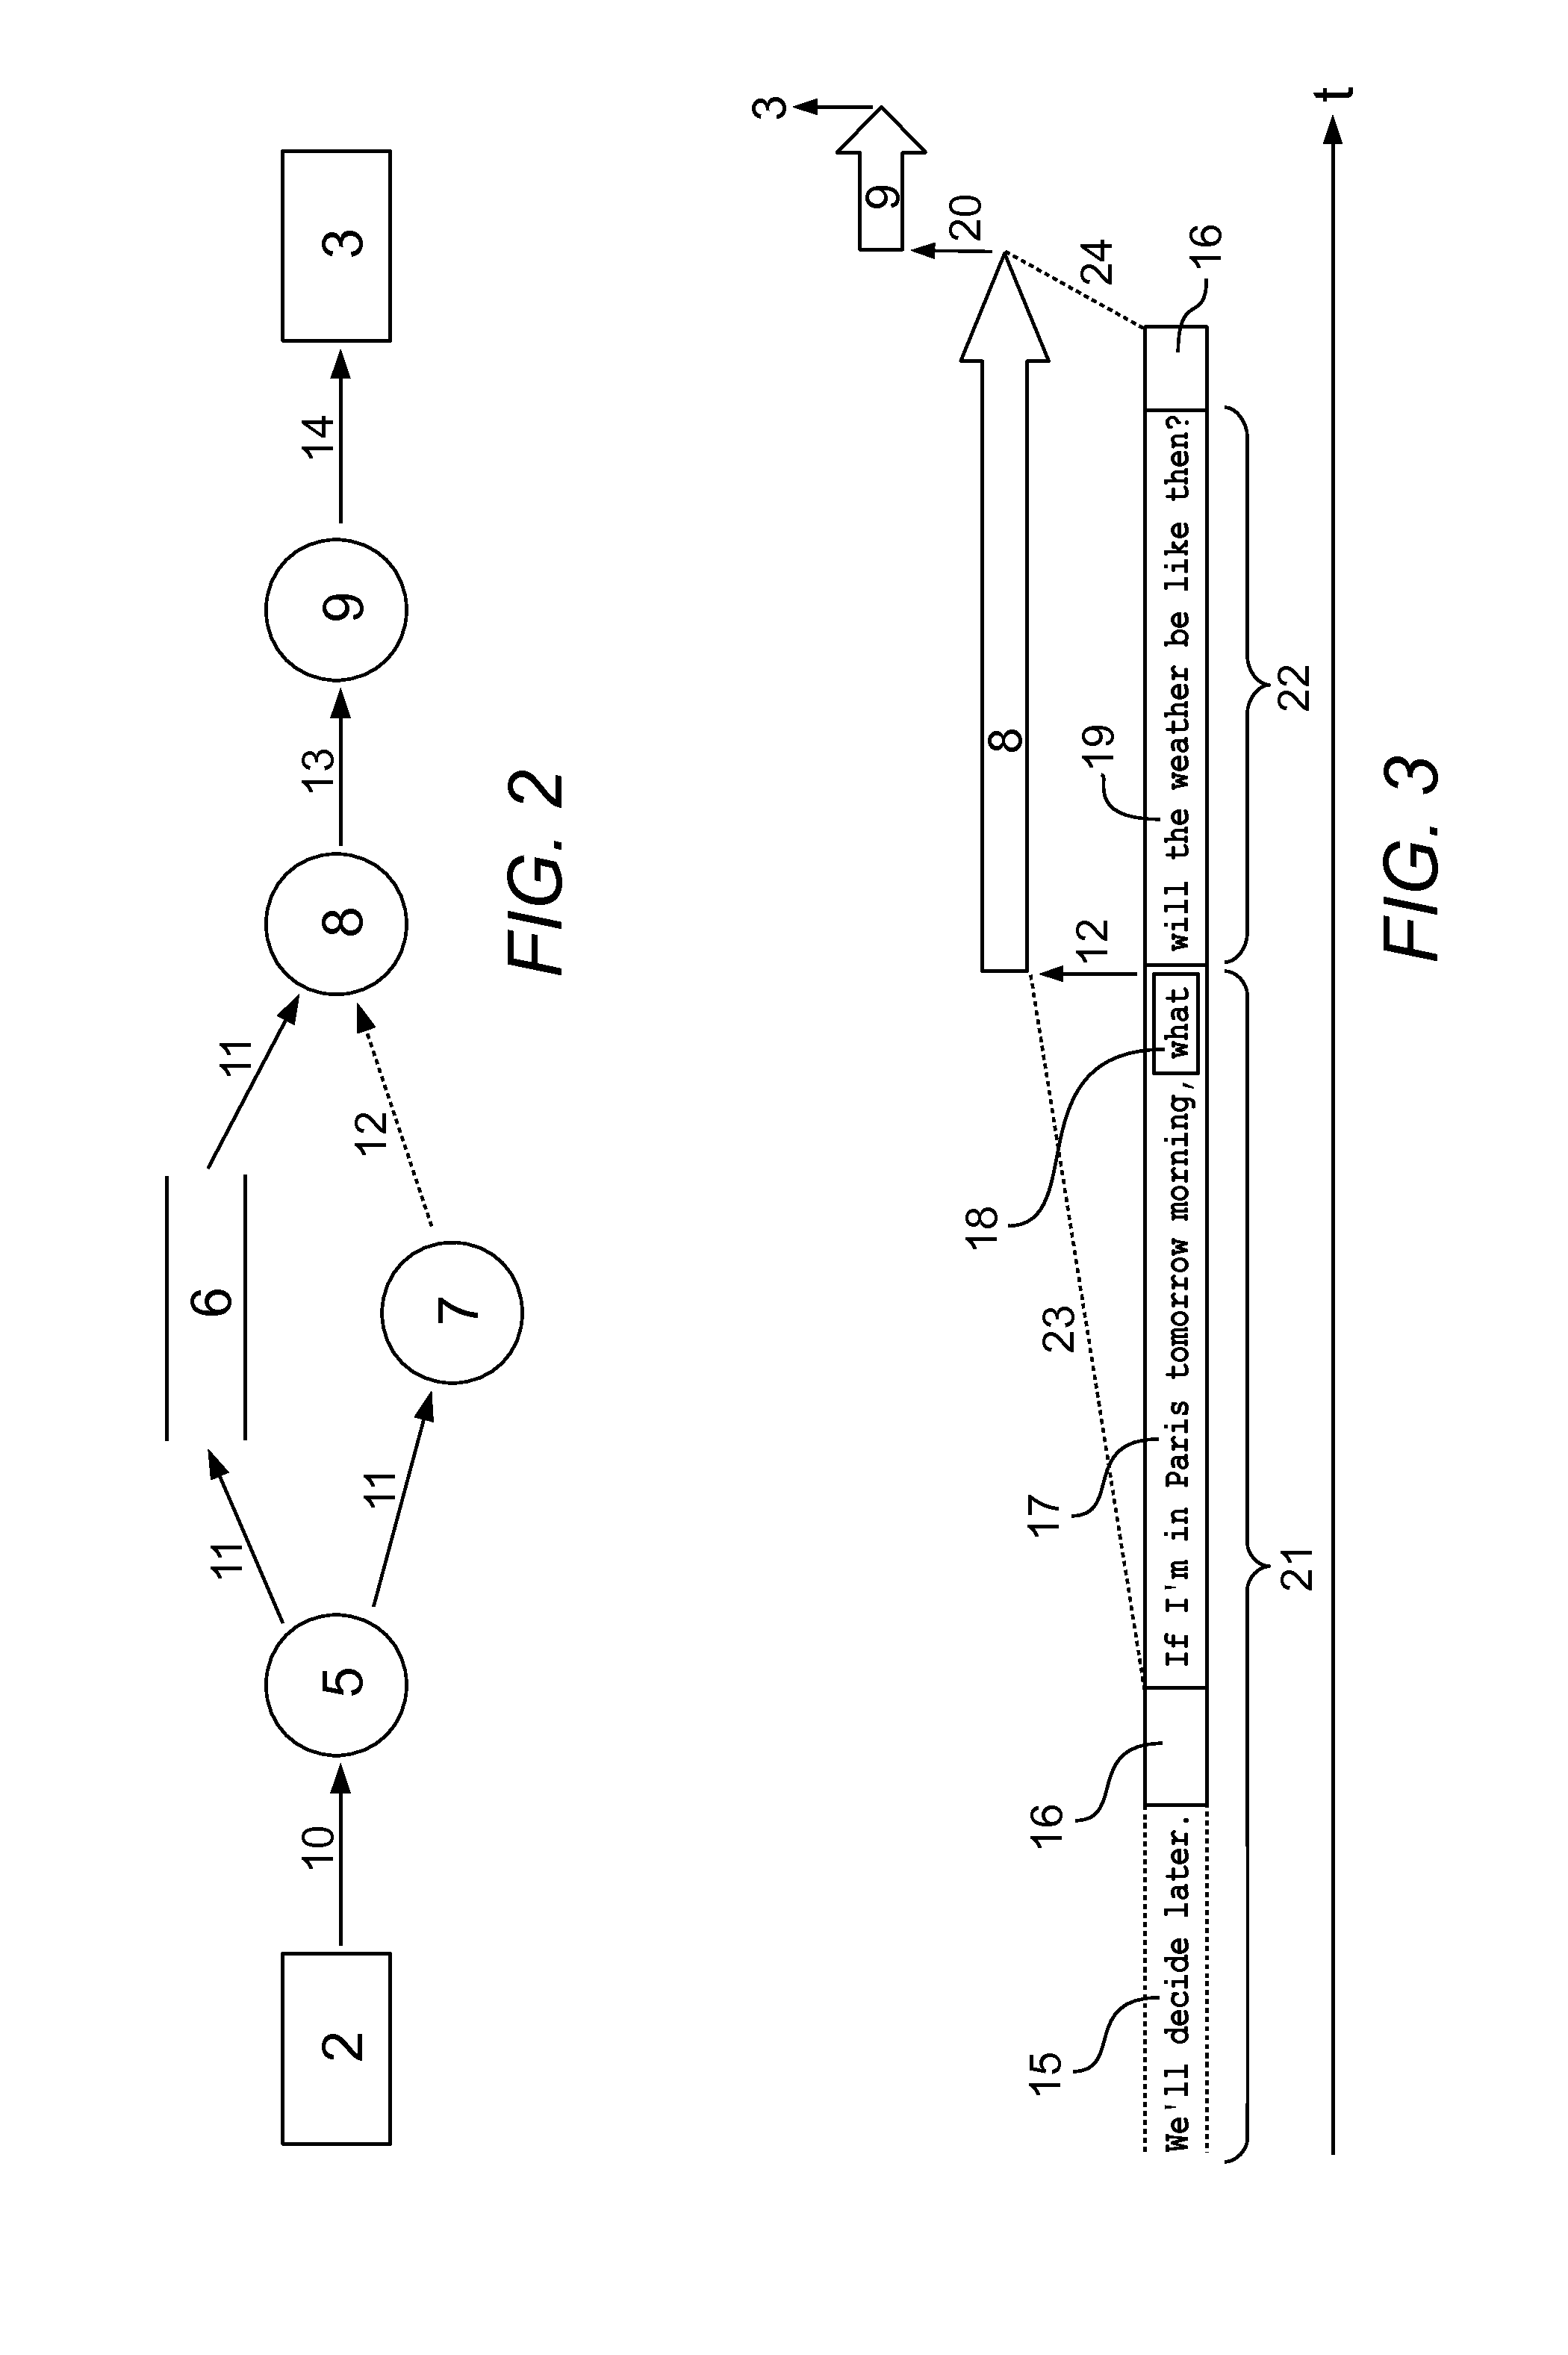 Method for Voice Activation of a Software Agent from Standby Mode